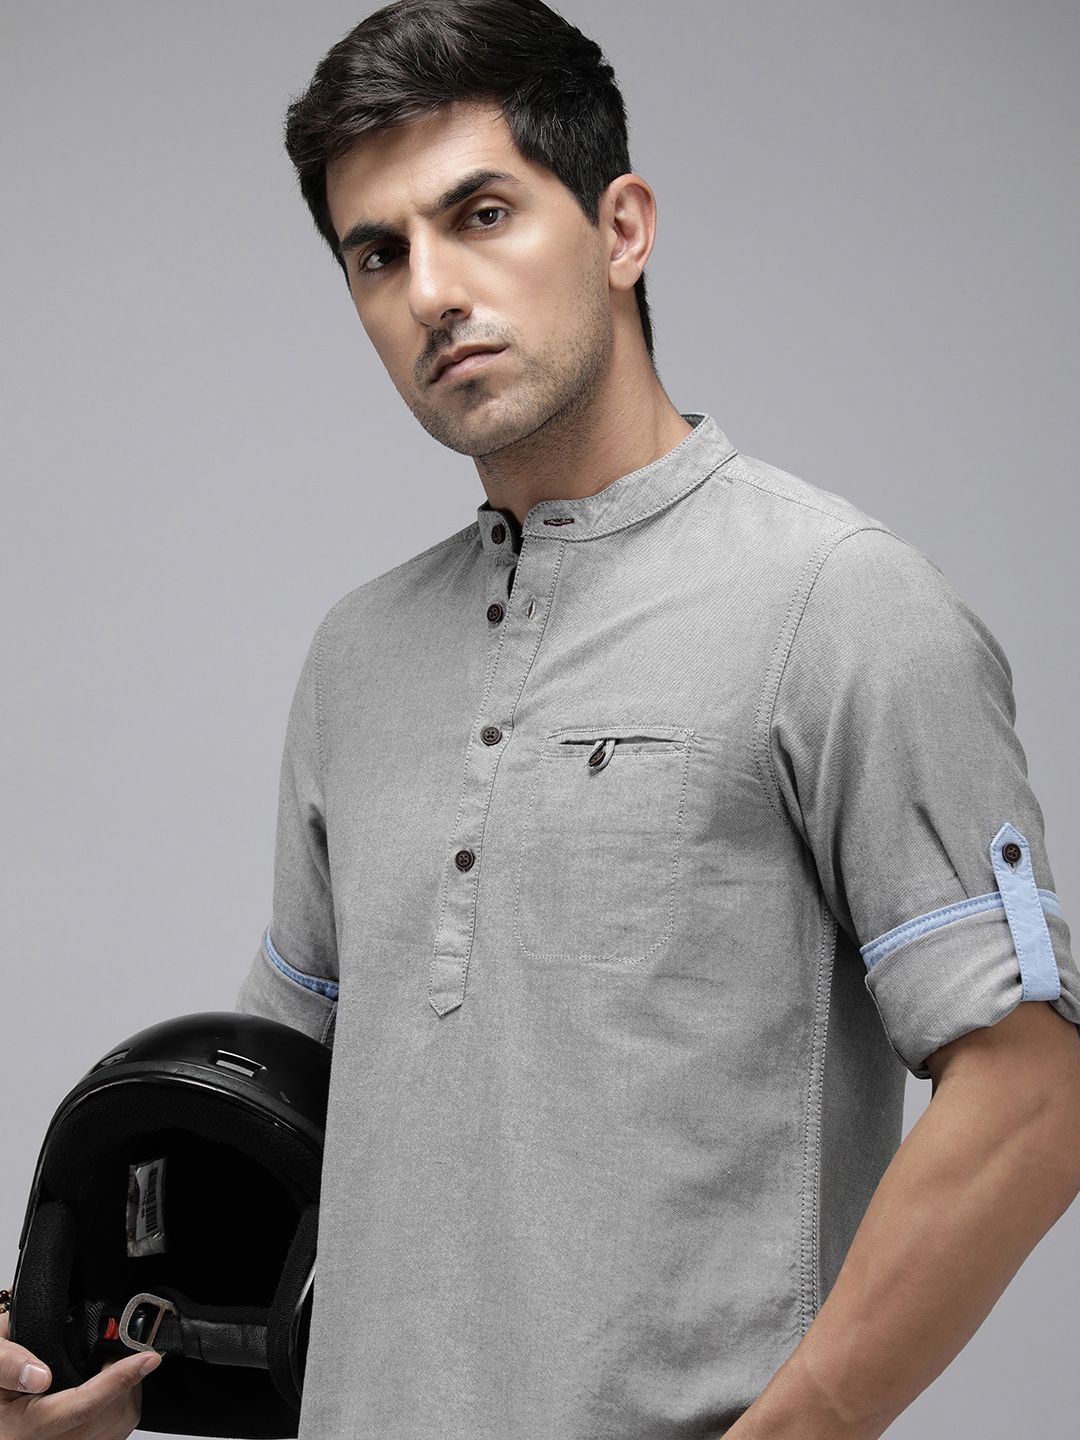 The Roadster Life Co. Solid Pure Cotton Casual Shirt